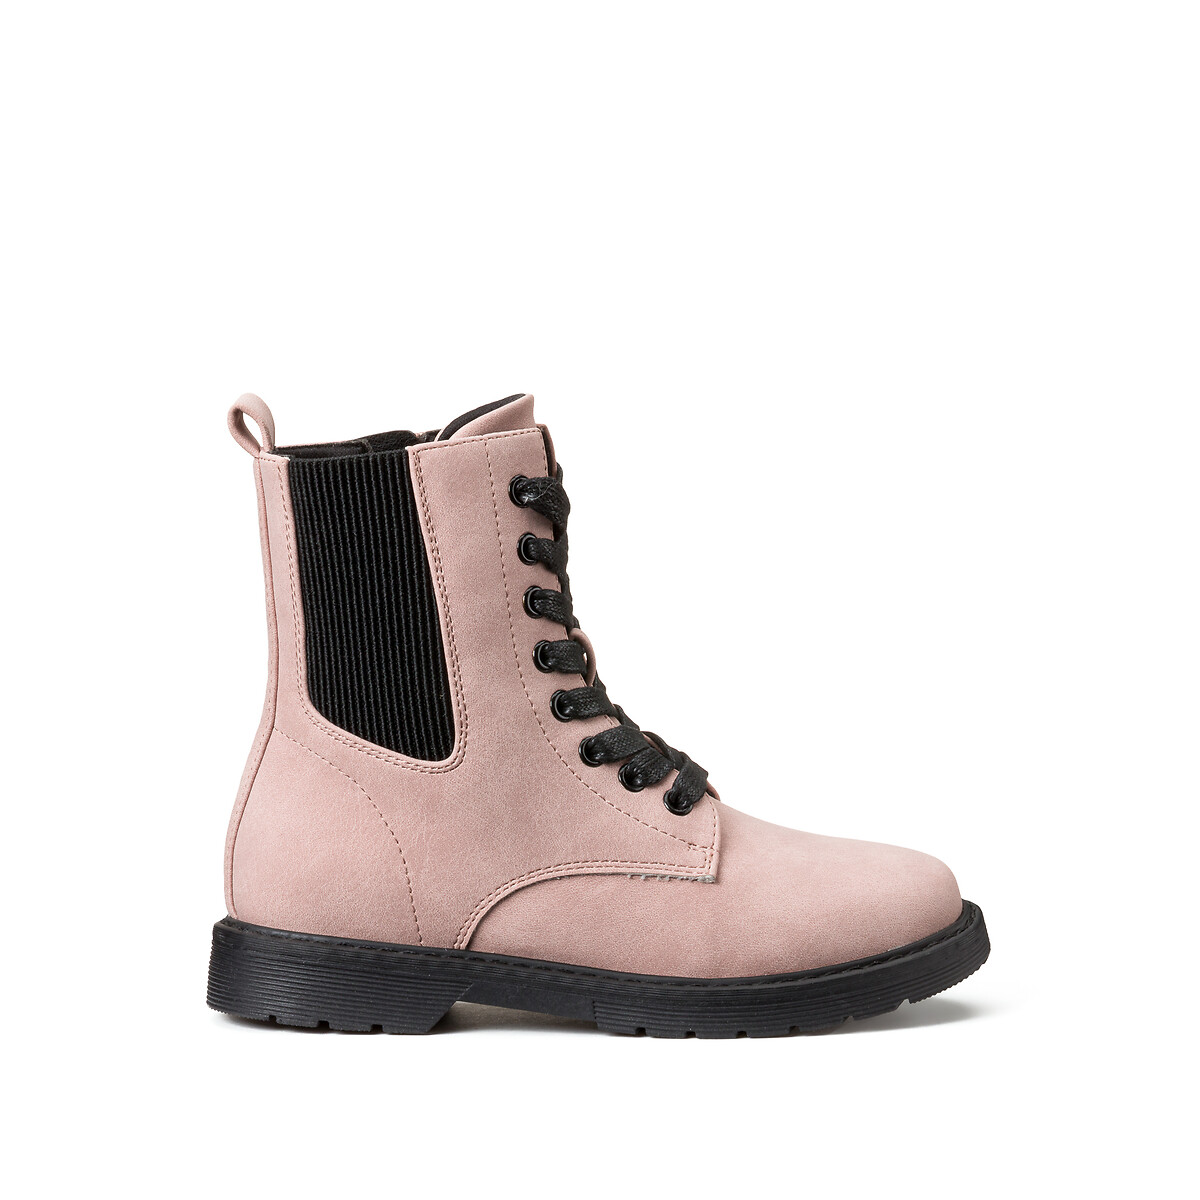 Kids Lace-Up Ankle Boots with Zip Fastening